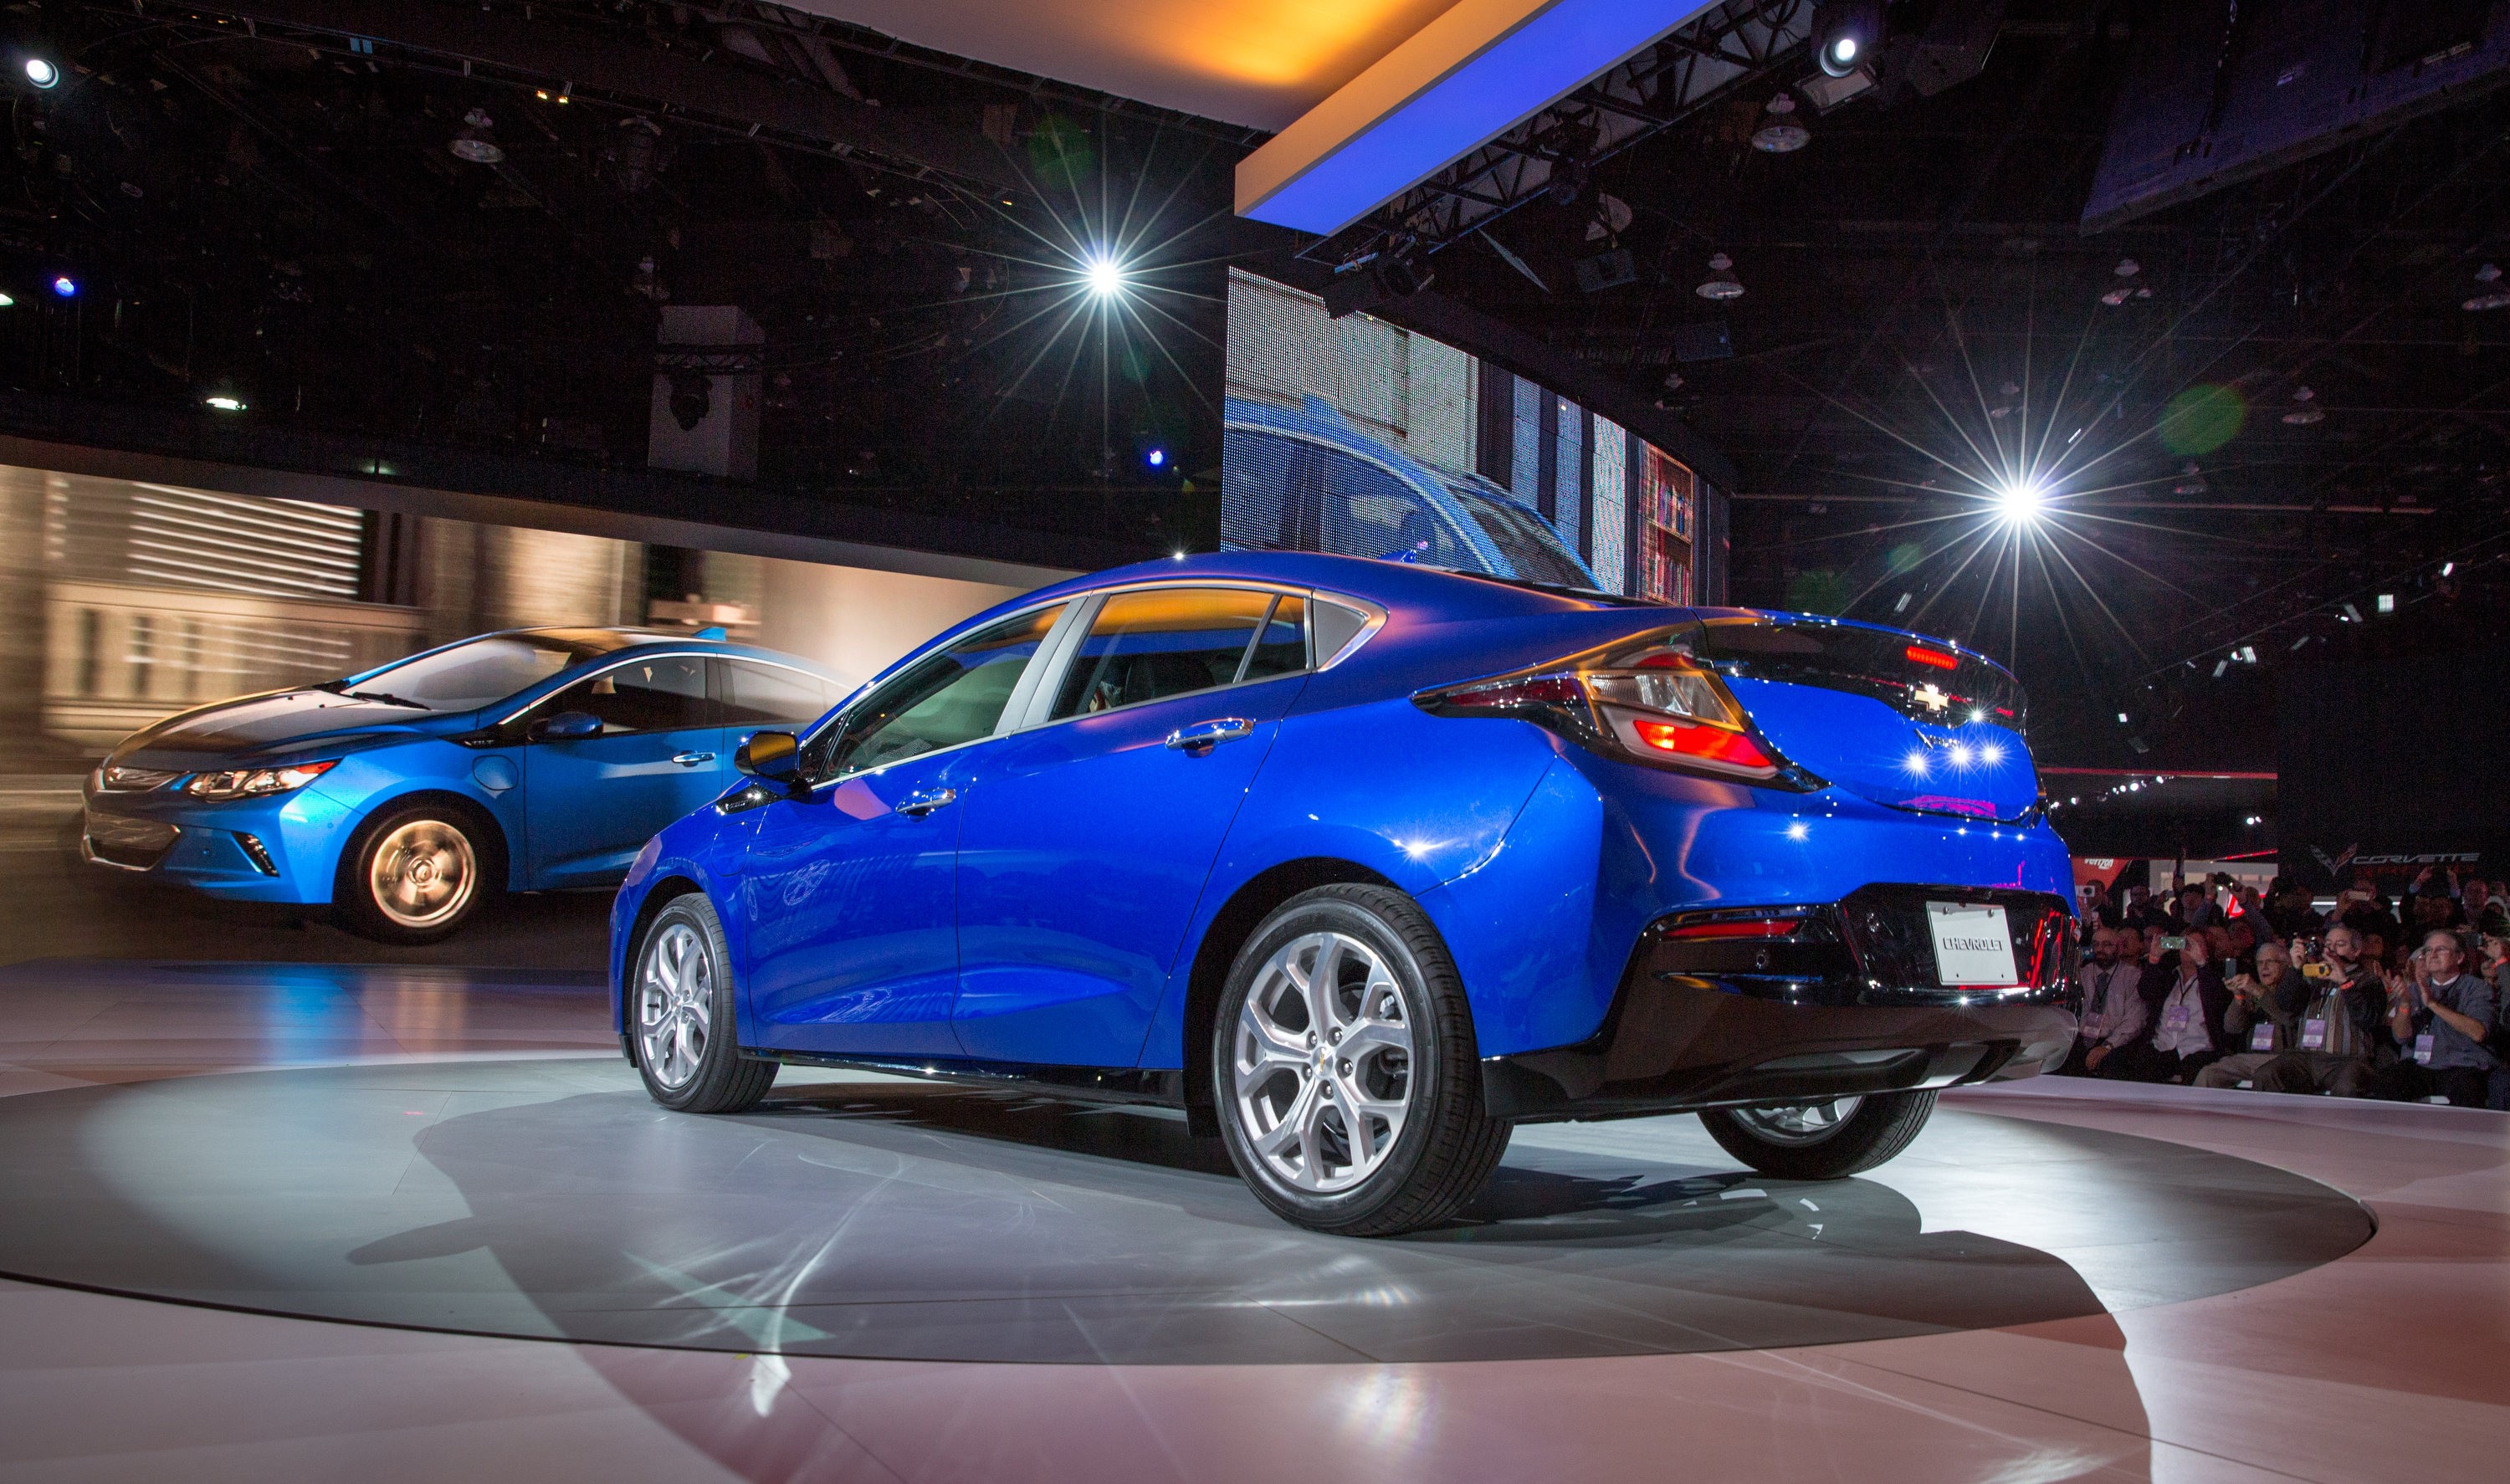 2016 Chevrolet Volt Hailed as the Next Generation of Electric Hybrid